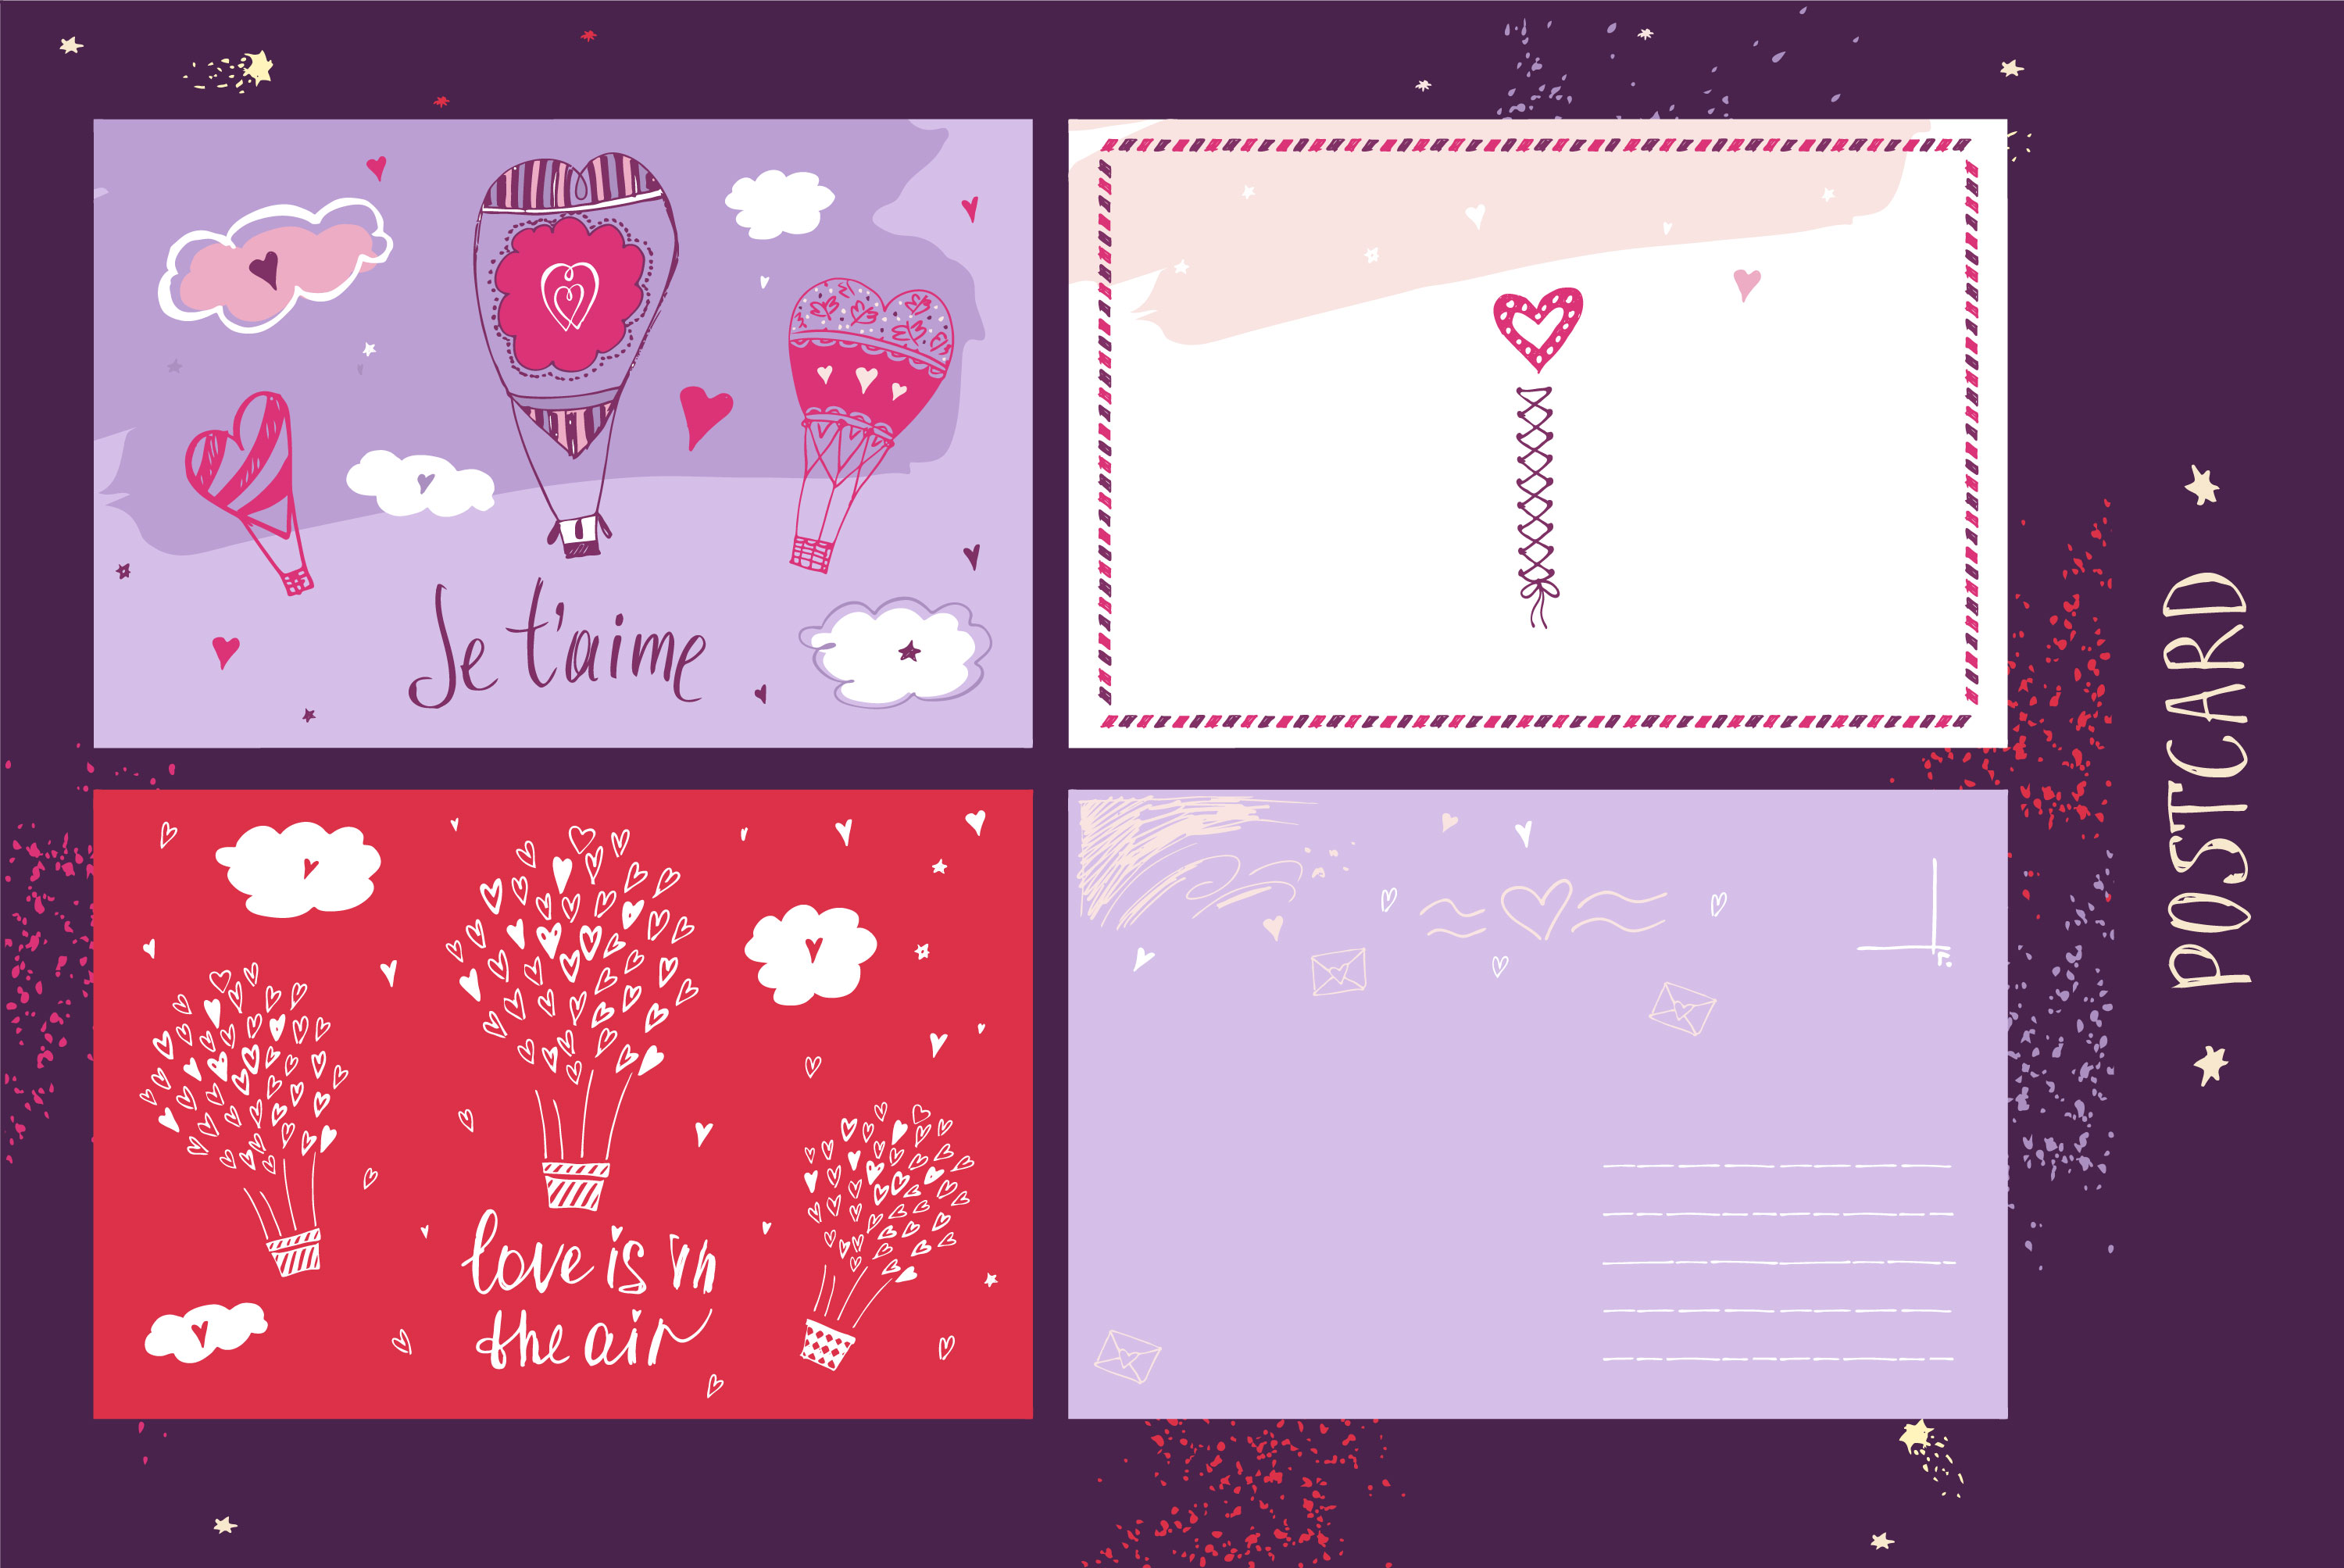 Four Valentine's day backgrounds.